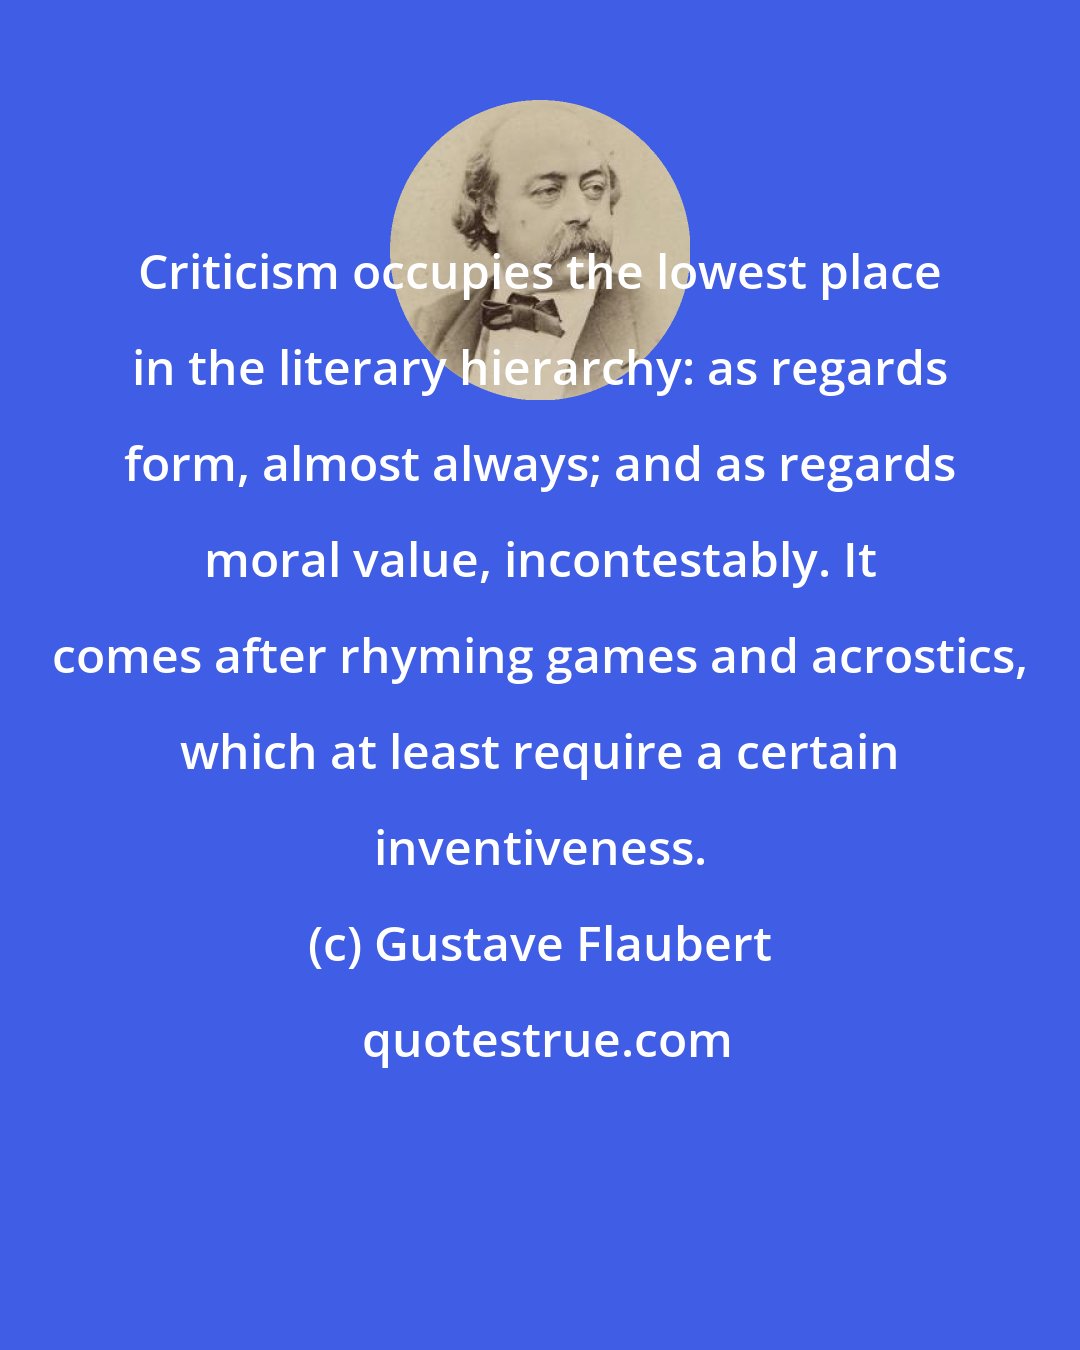 Gustave Flaubert: Criticism occupies the lowest place in the literary hierarchy: as regards form, almost always; and as regards moral value, incontestably. It comes after rhyming games and acrostics, which at least require a certain inventiveness.